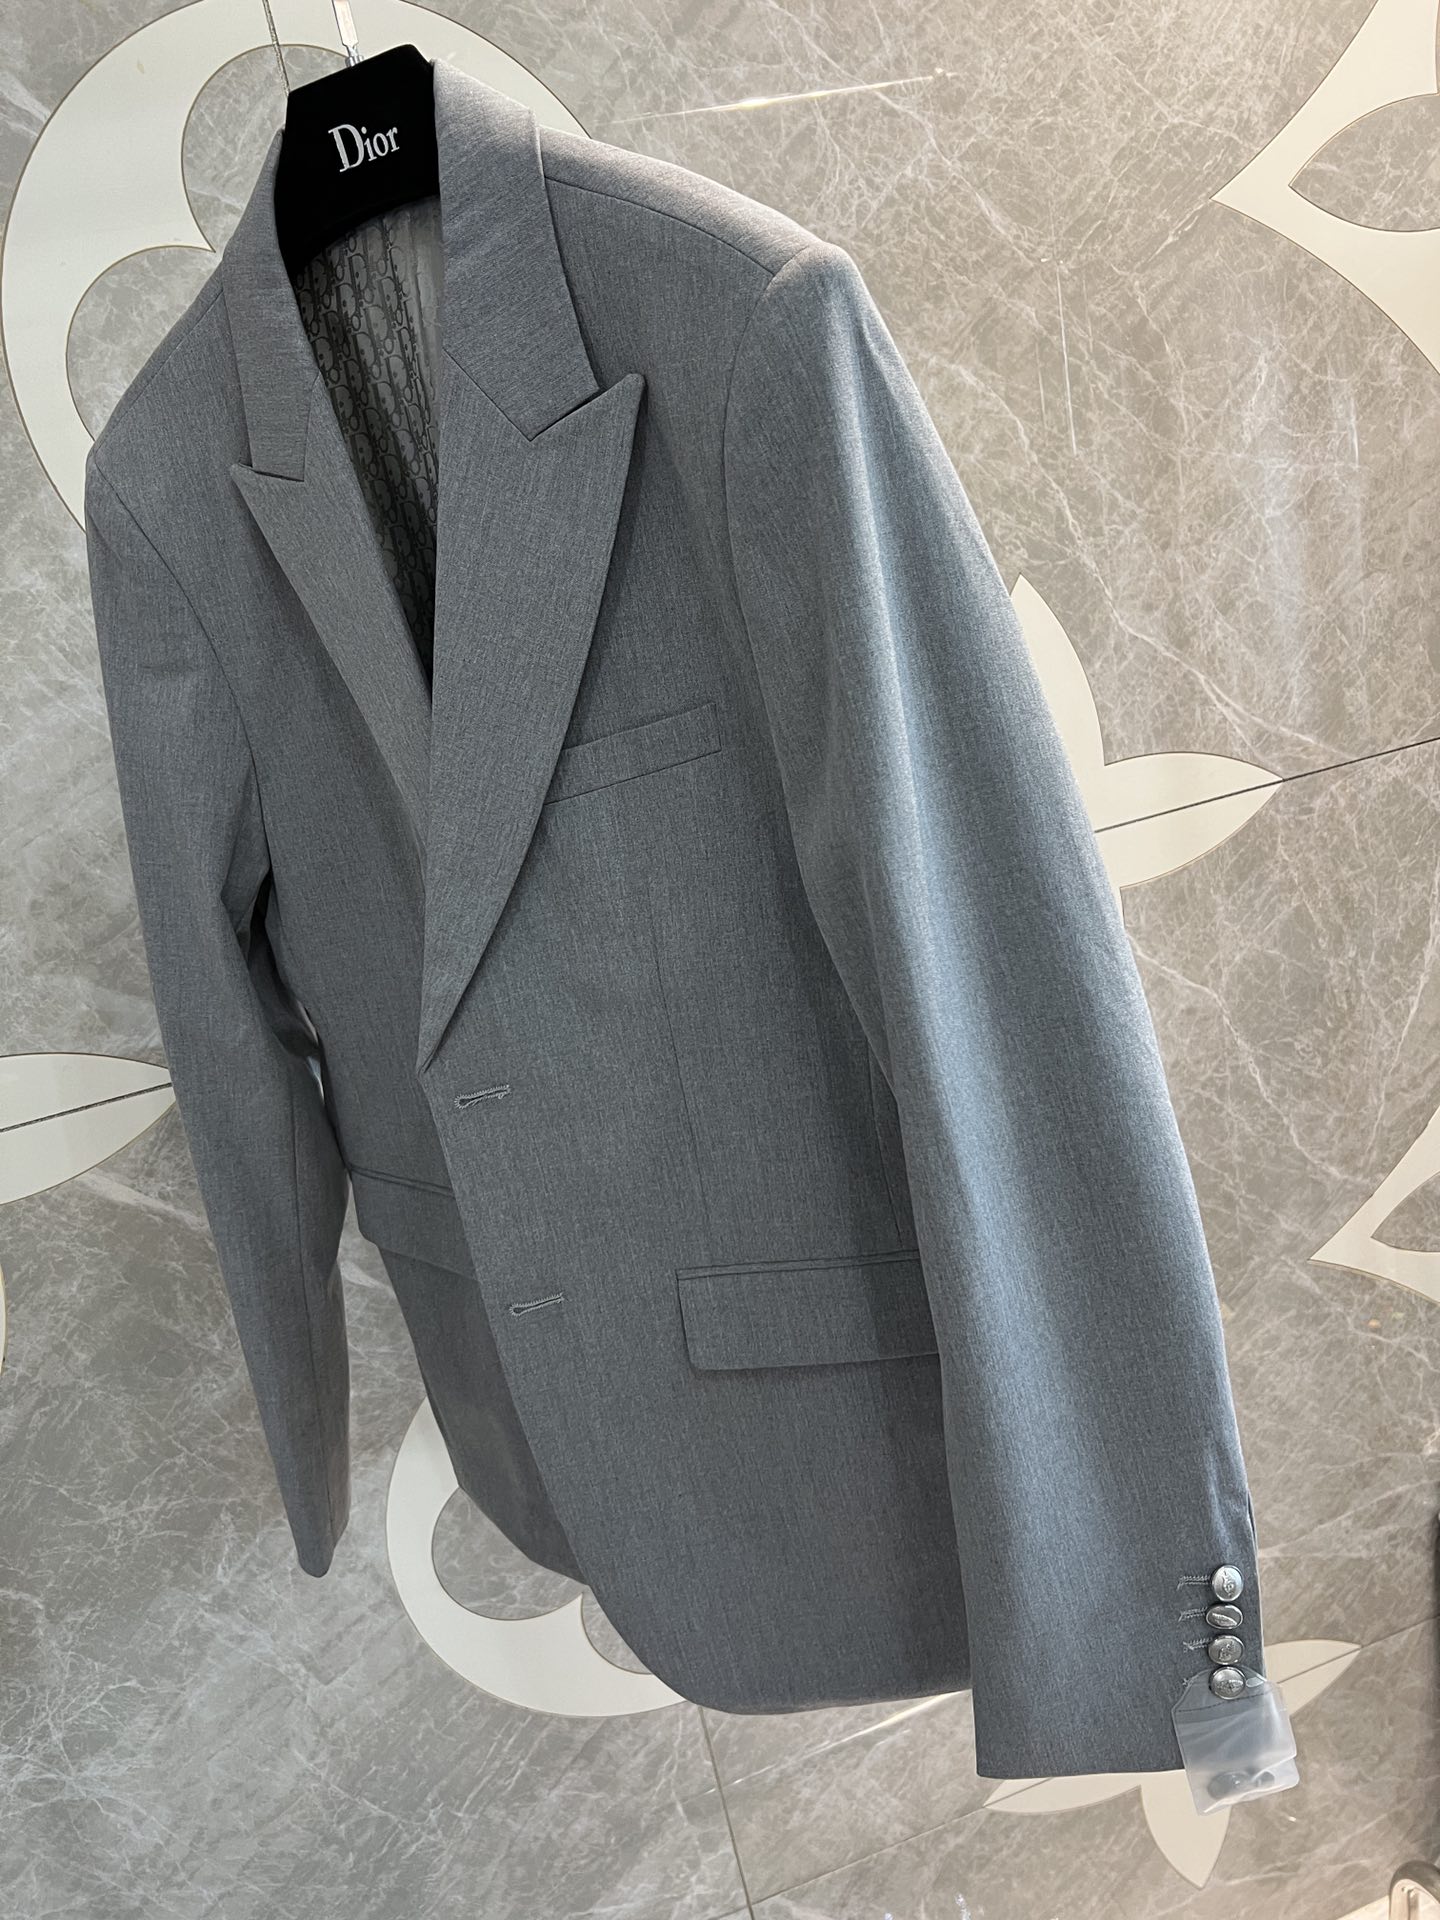 Christian Dior Business Suit